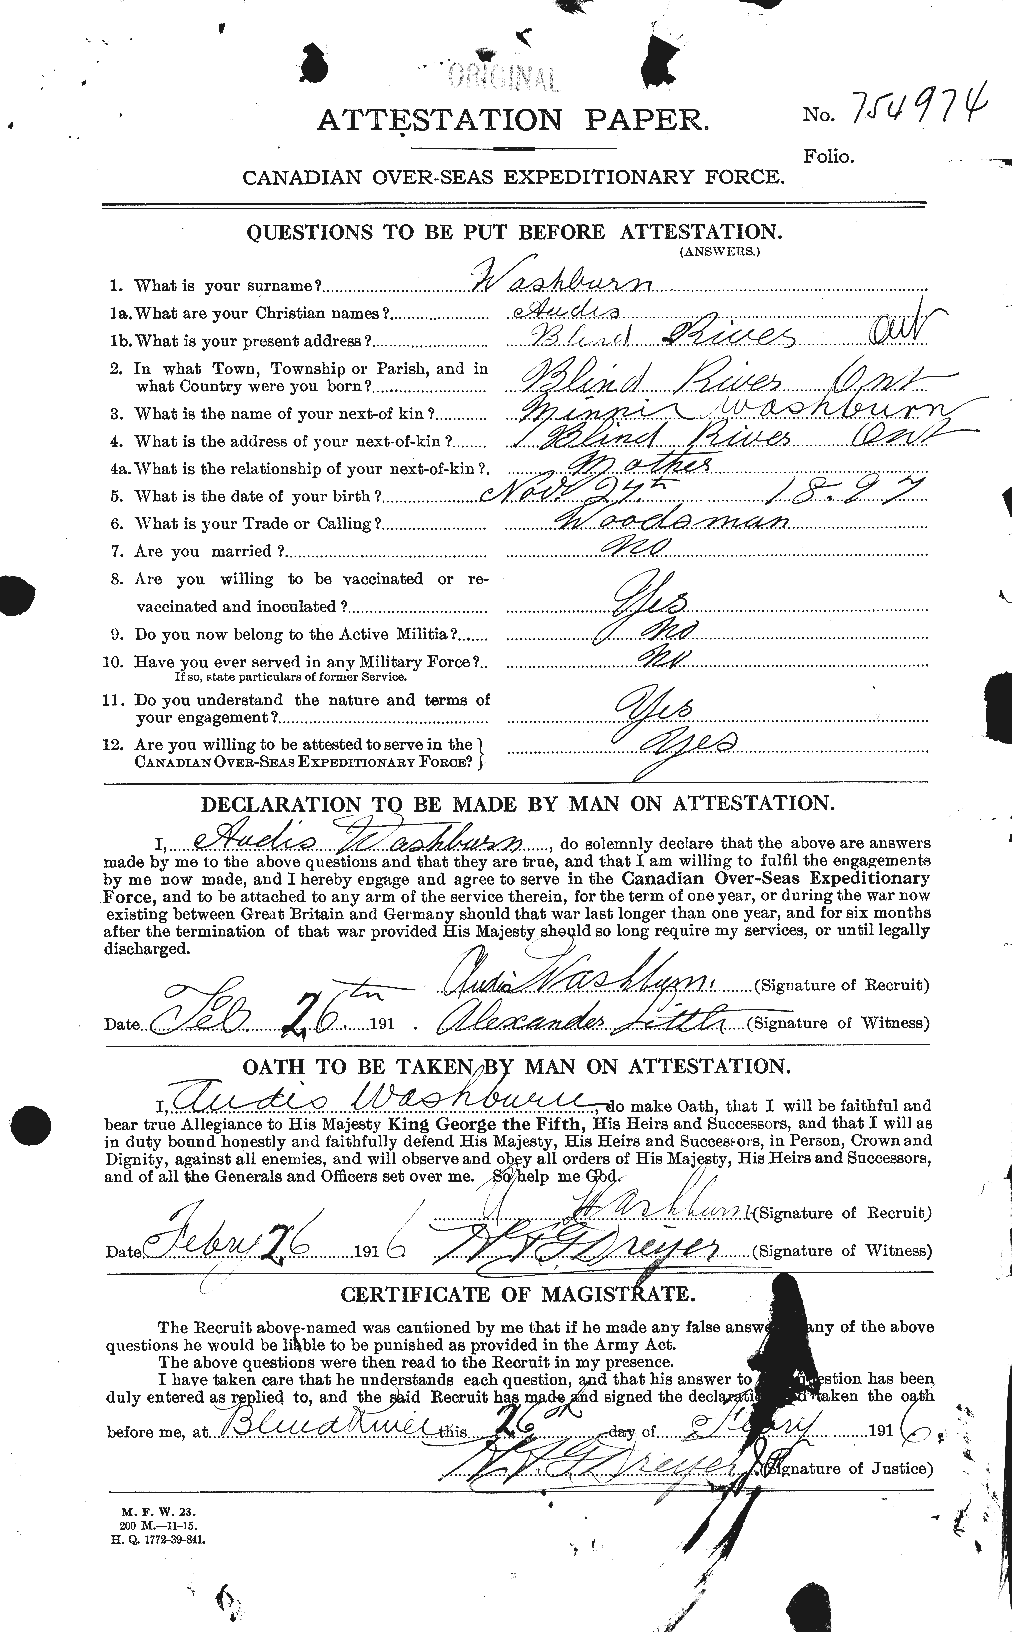 Personnel Records of the First World War - CEF 657057a